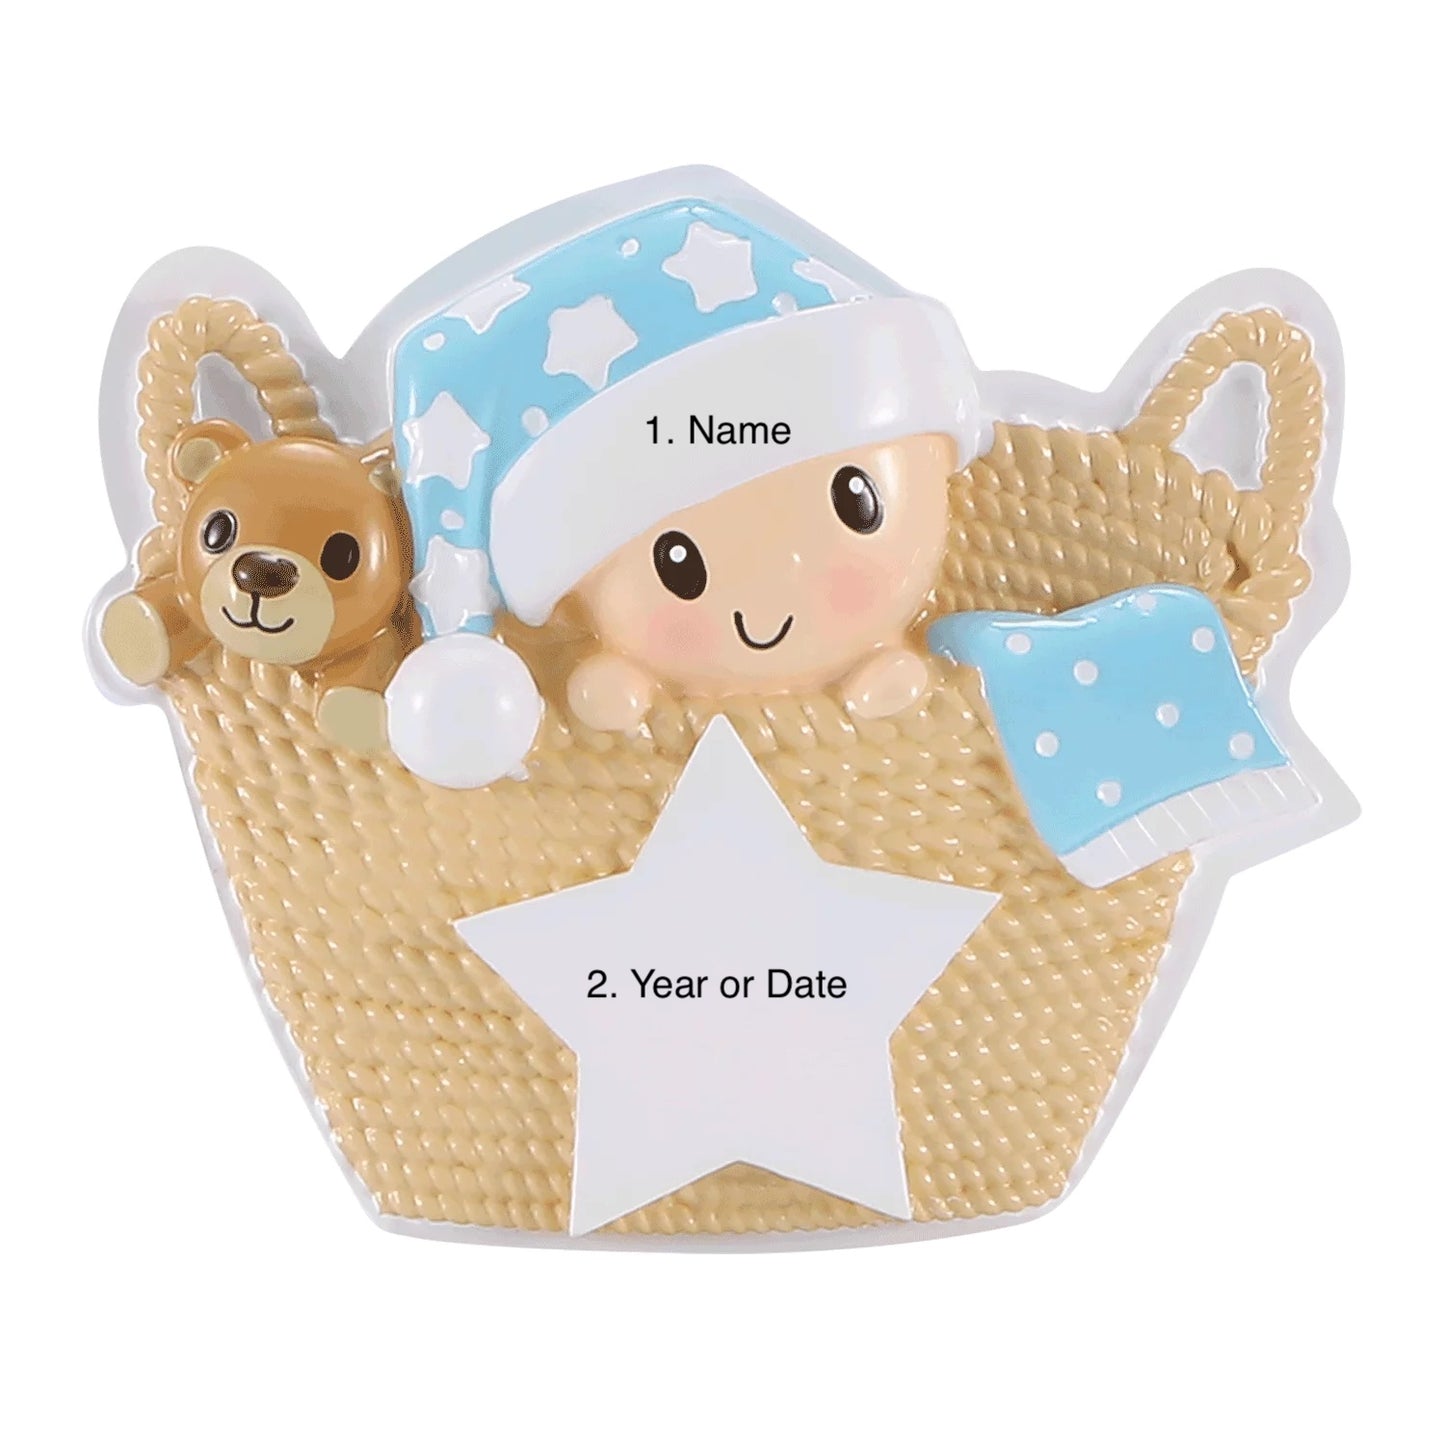 Baby in Basket - Blue Ornament